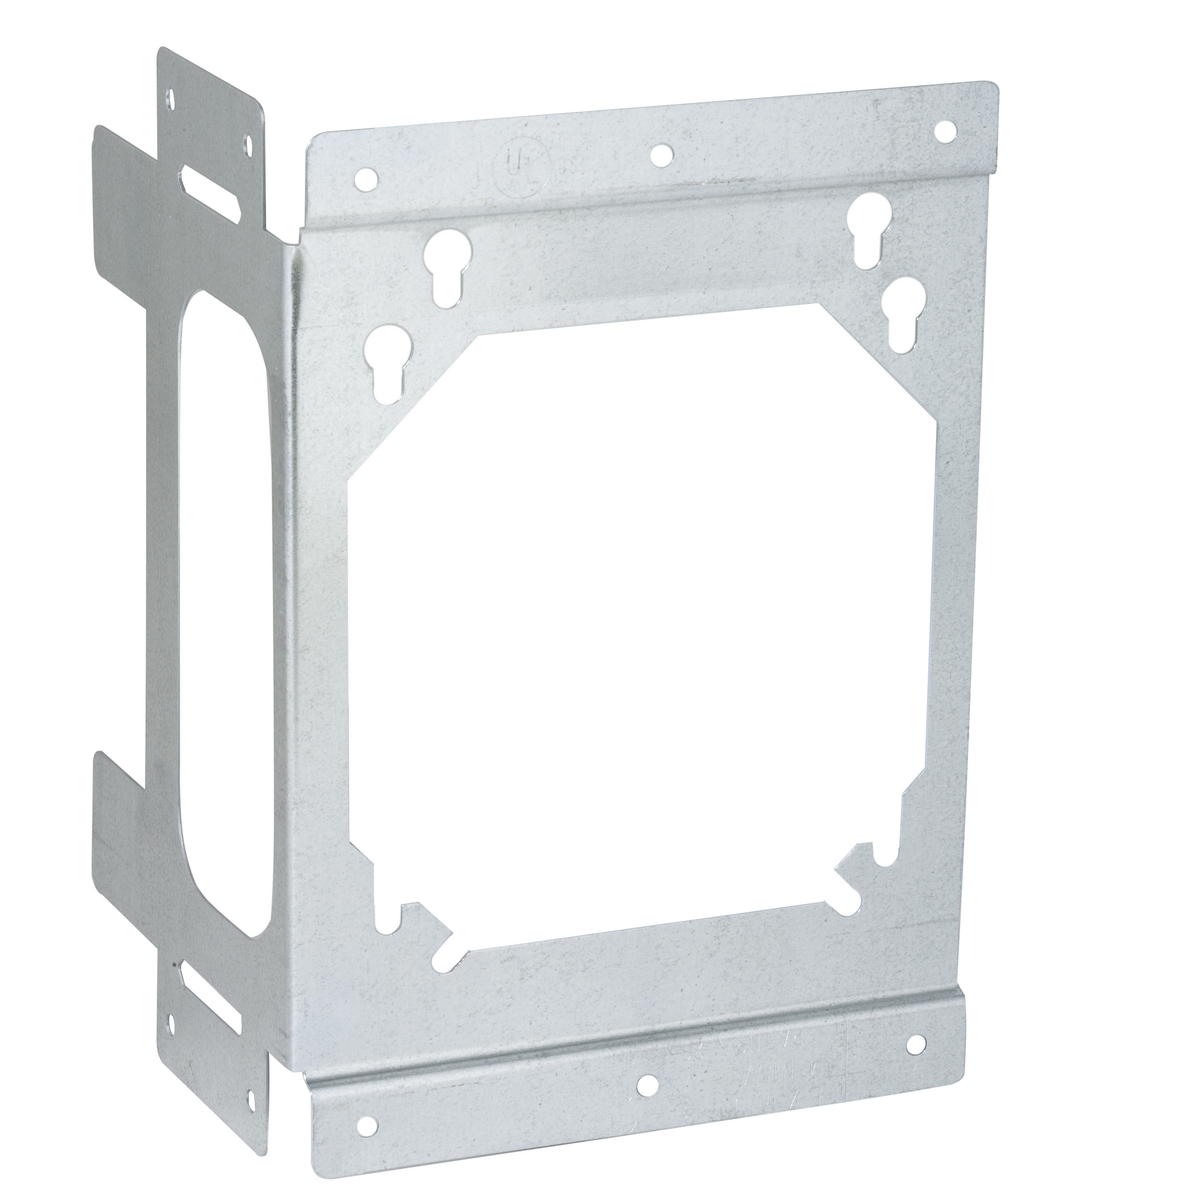 Two-Point Box Mounting Bracket, Left or Right Side Stud Mount